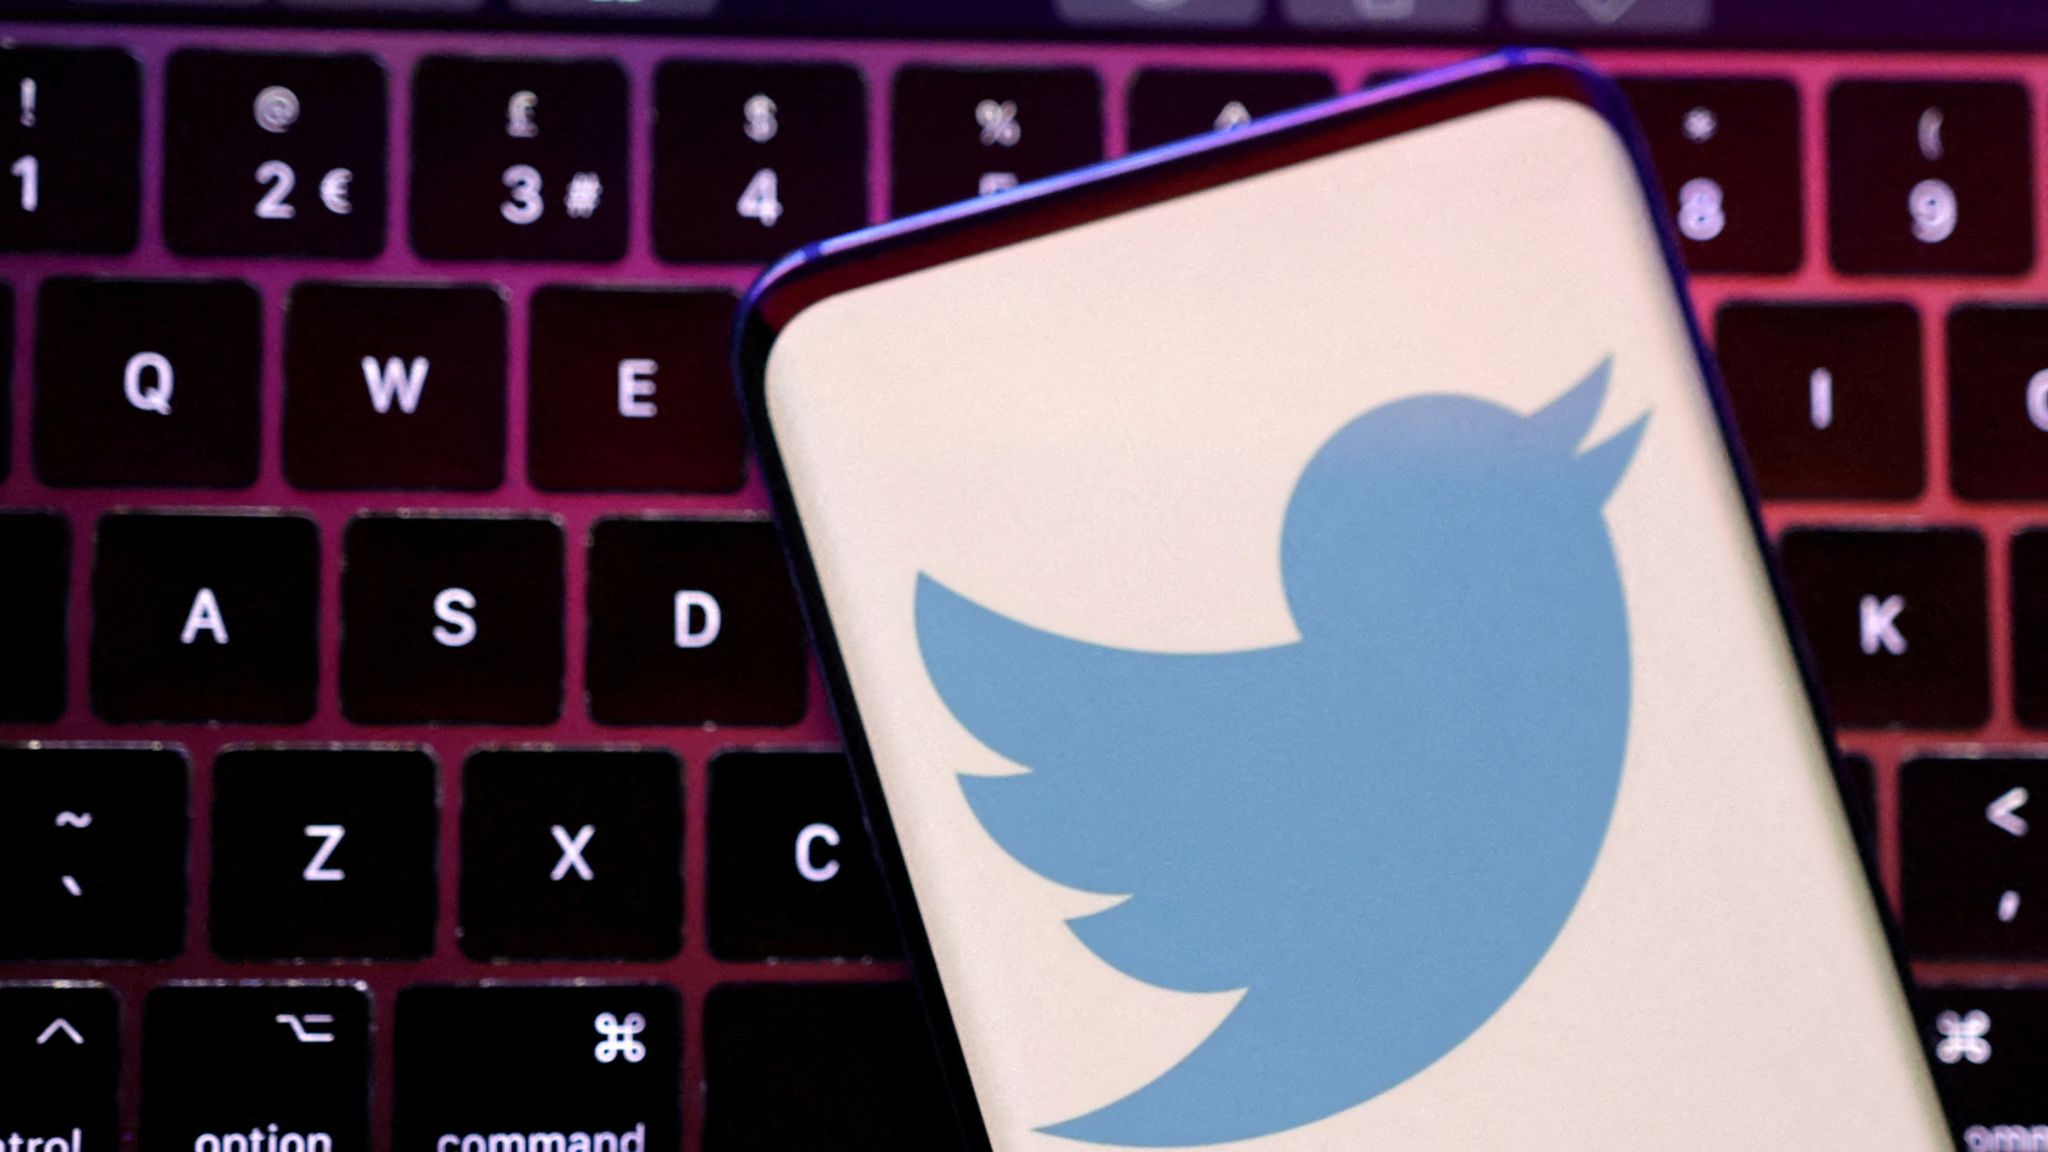 Twitter loses second trust and safety chief since Elon Musk takeover